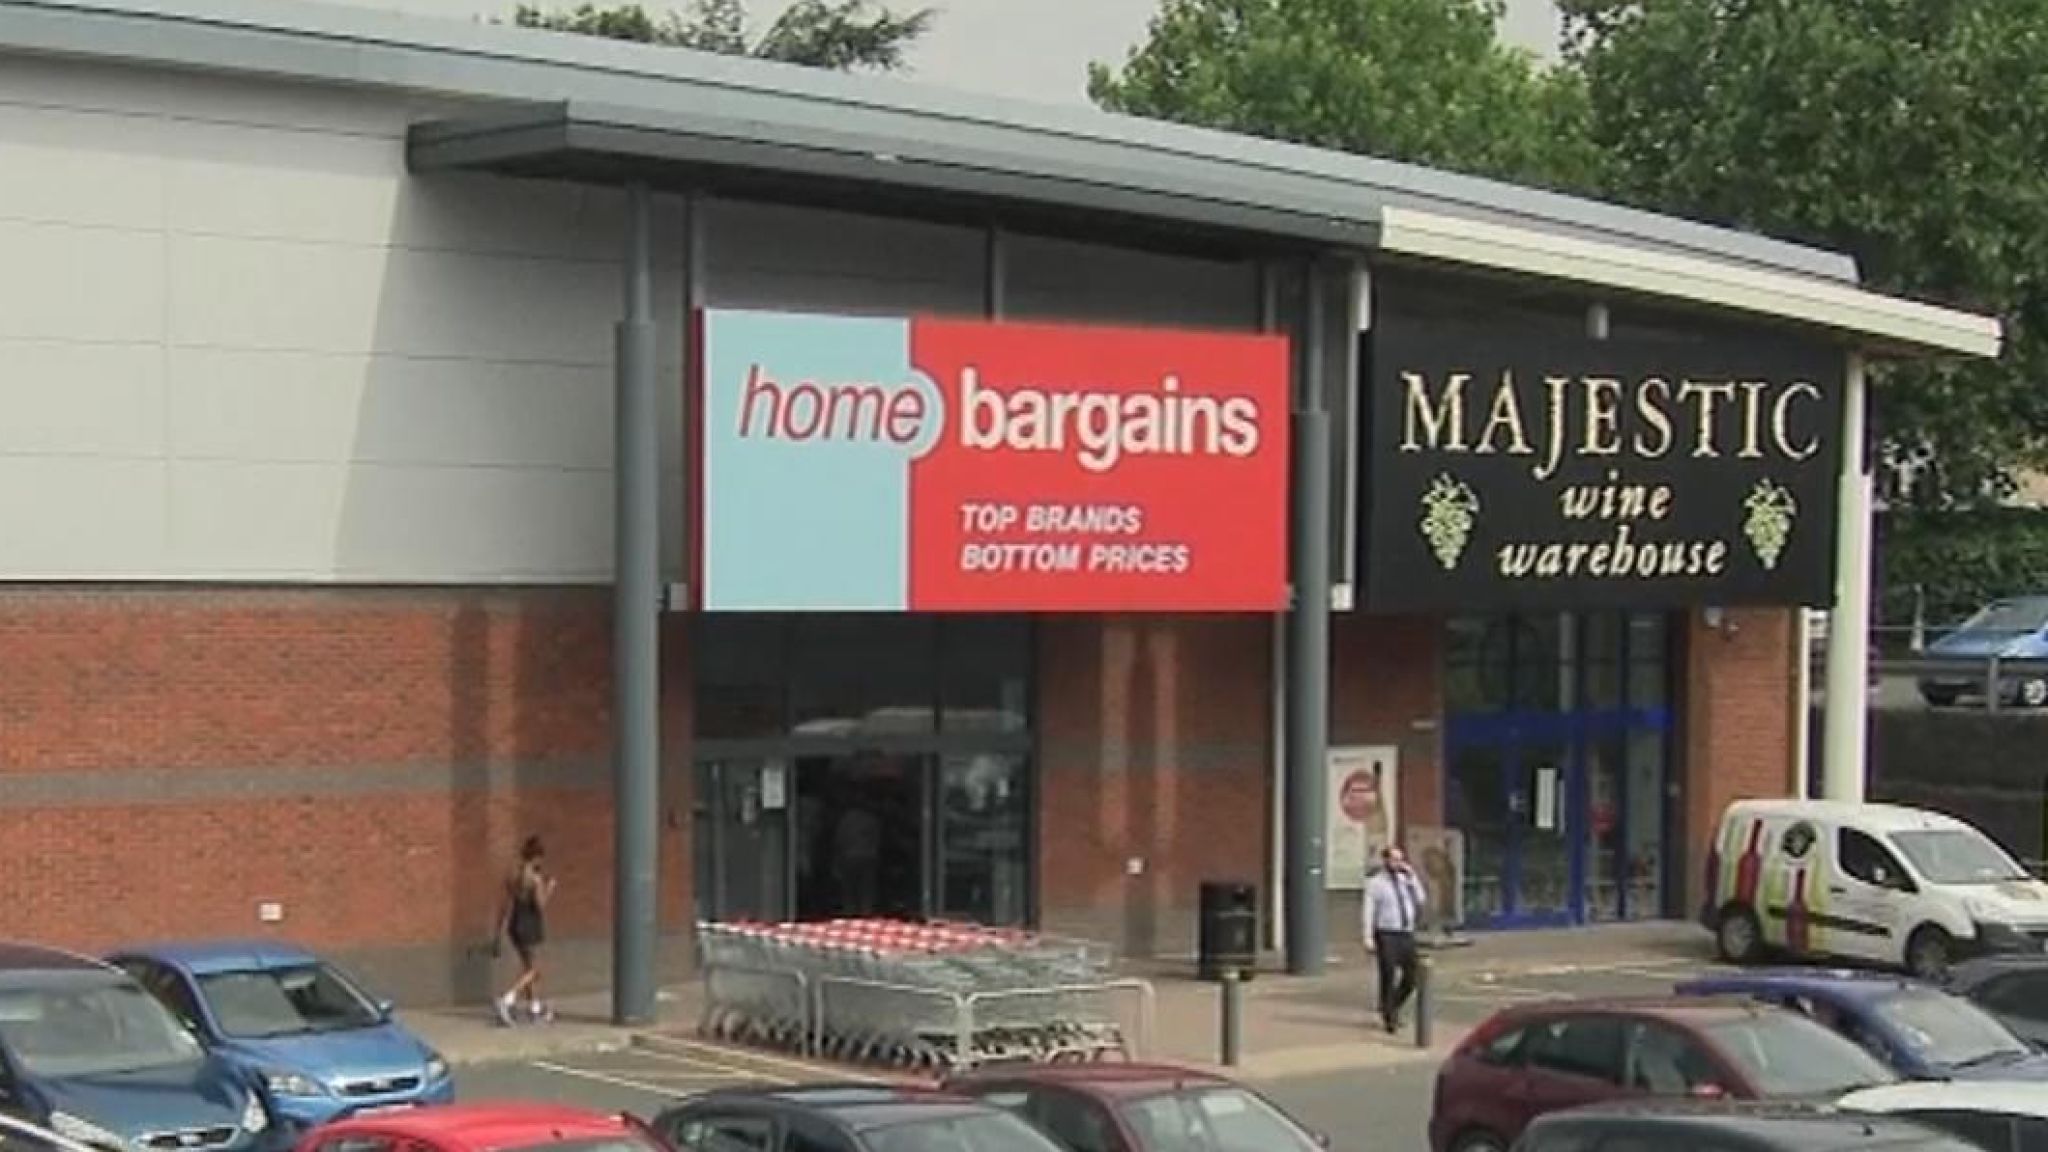 The attack is said to have happened at Home Bargains shop in Worcester.